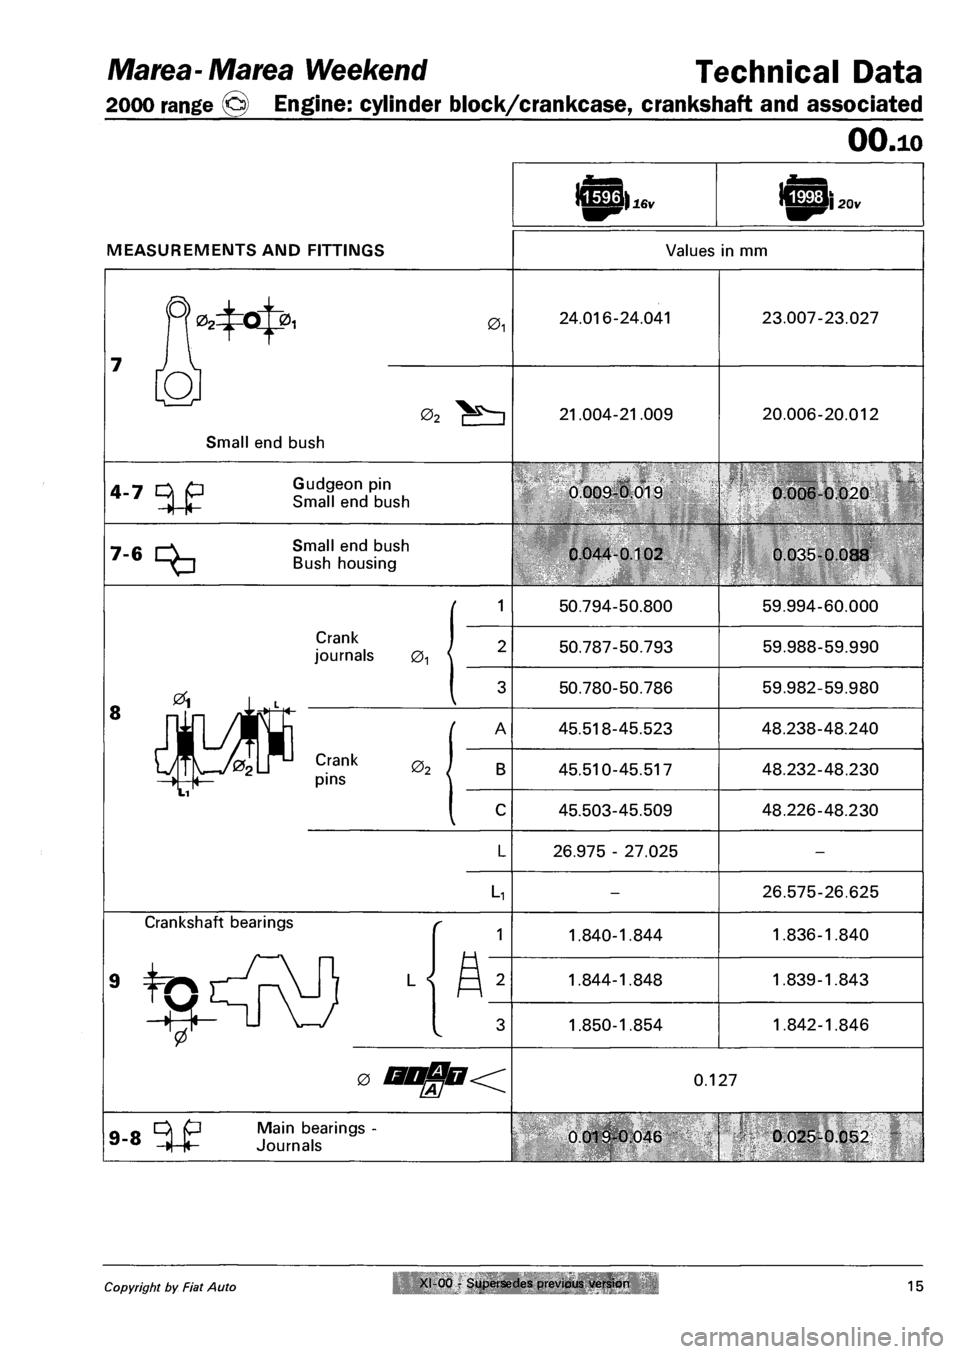 FIAT MAREA 2001 1.G User Guide Marea- Marea Weekend Technical Data 
2000 range © Engine: cylinder block/crankcase, crankshaft and associated 
OO.io 
MEASUREMENTS AND FITTINGS 
16v mi 20v 
Values in mm 
01 24.016-24.041 
02 21.004-